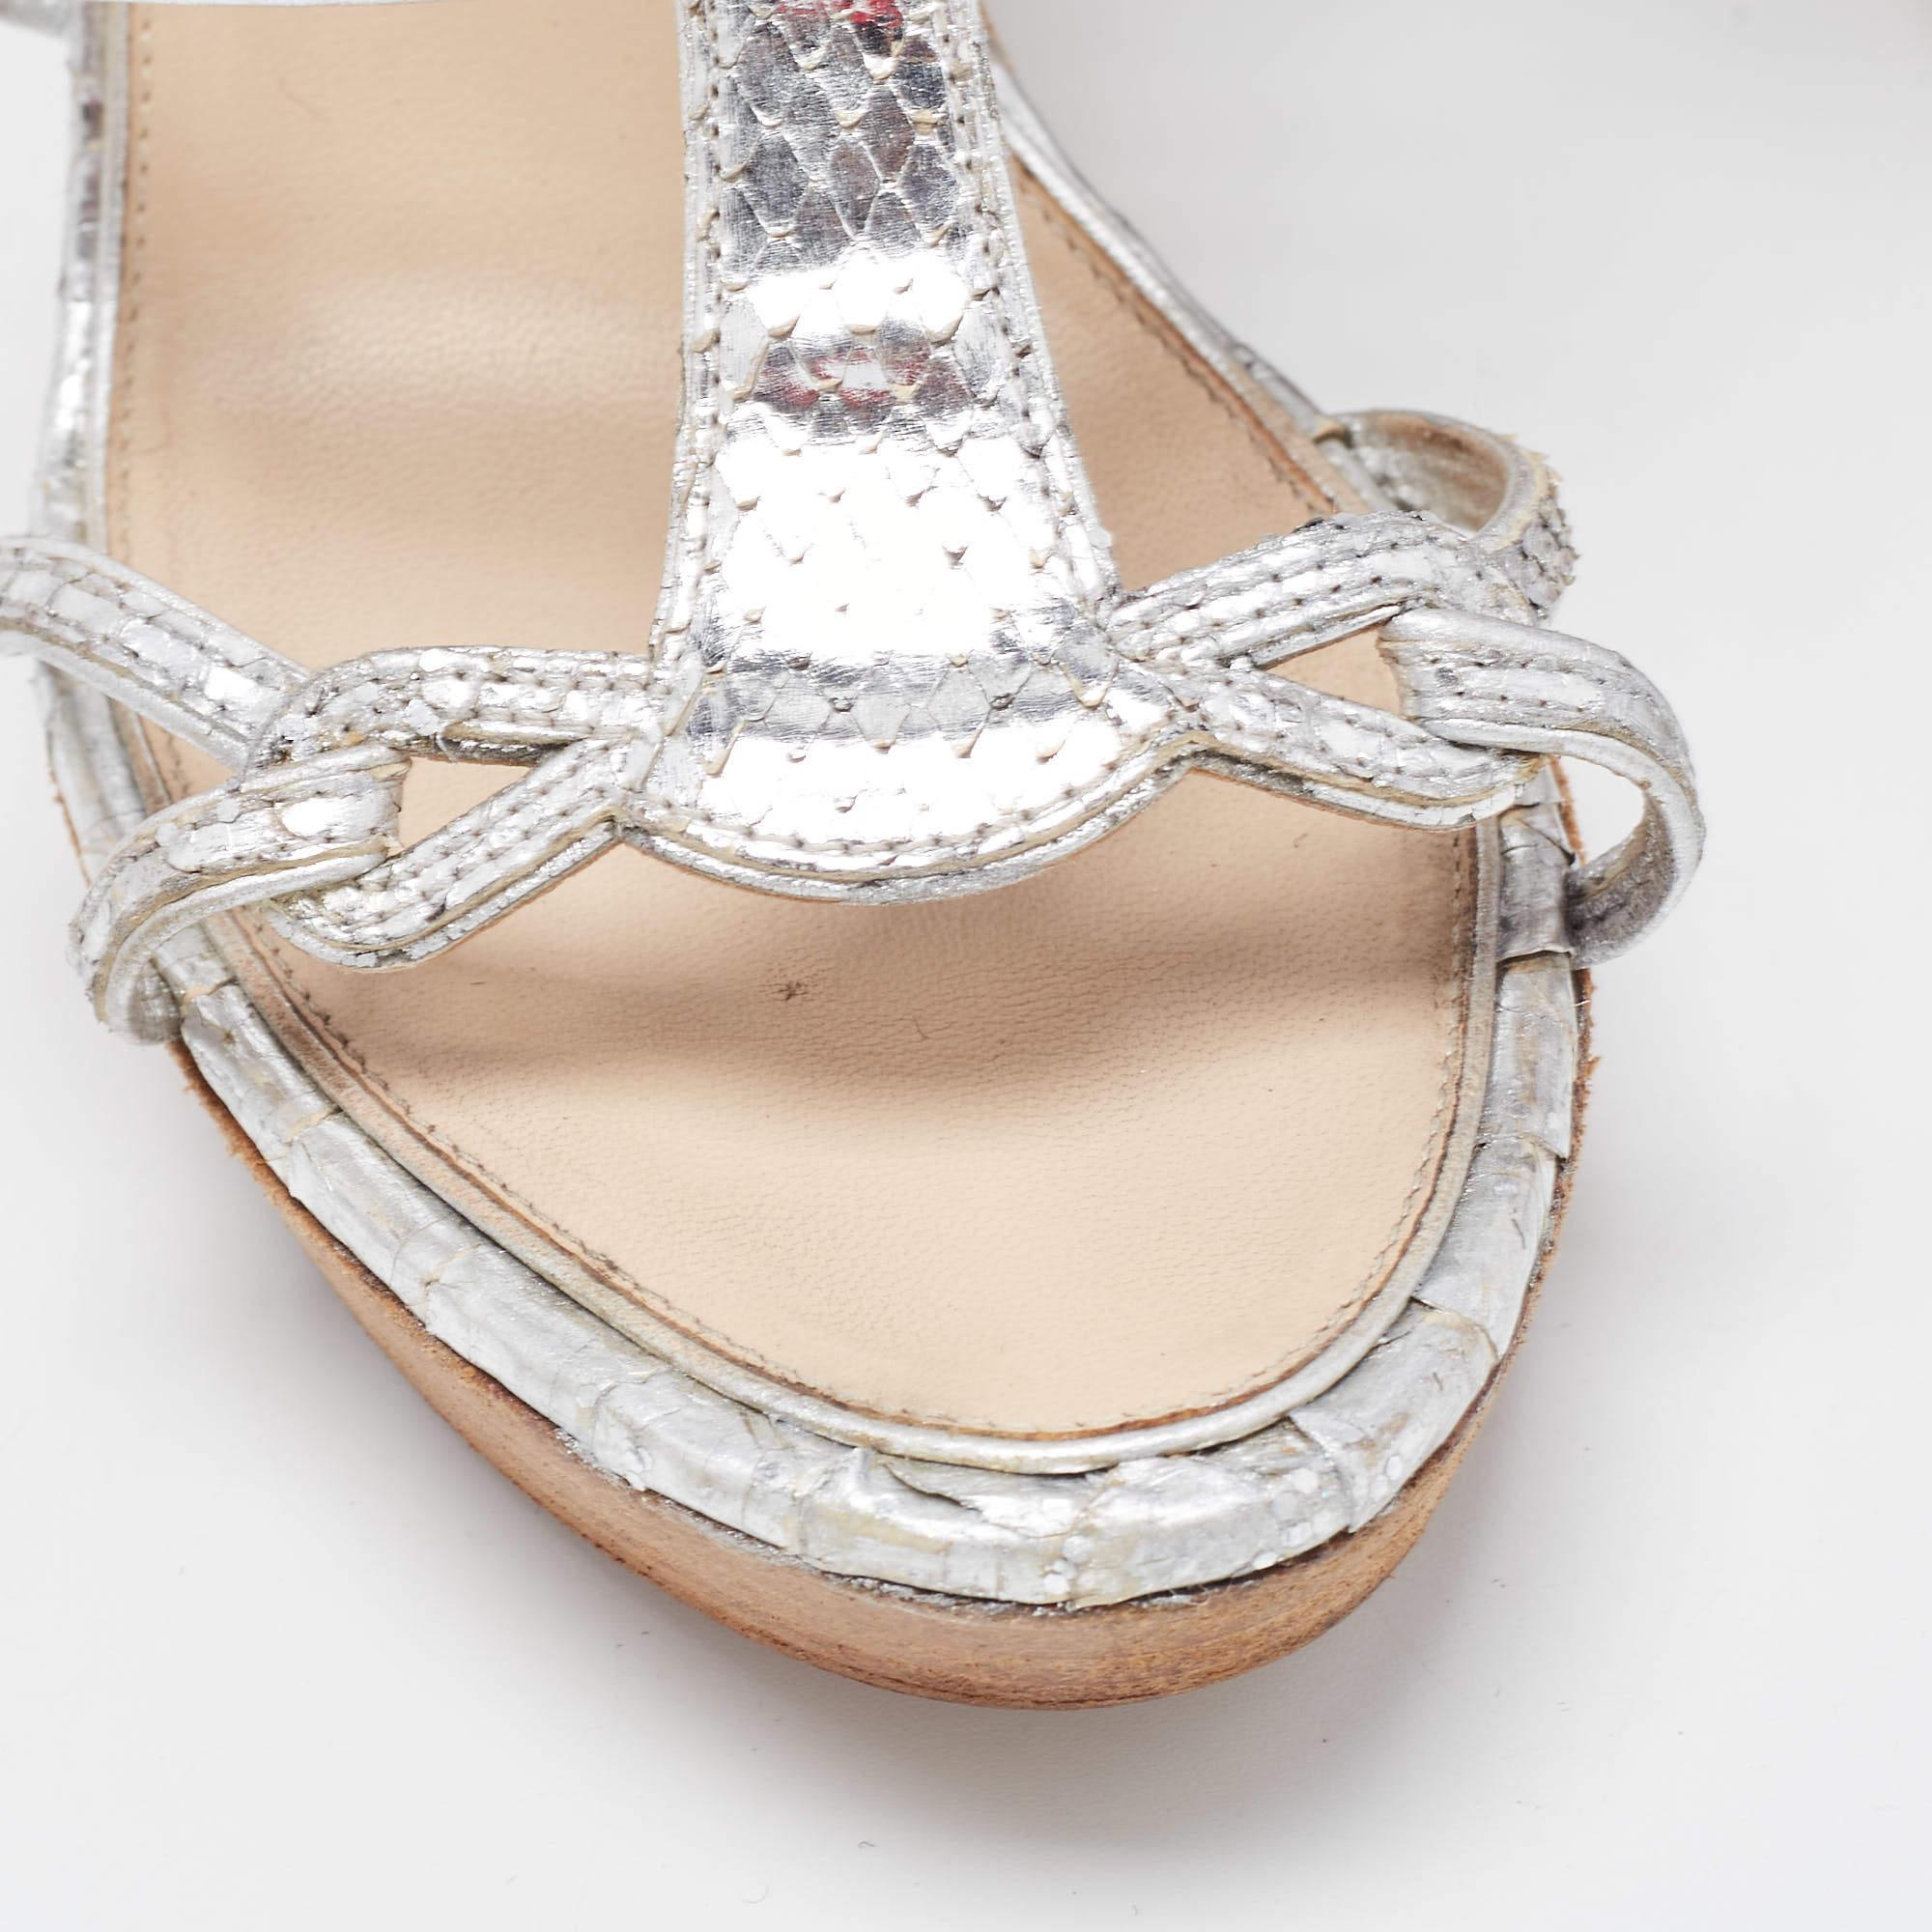 Chanel Silver Python Embossed Wedge Sandals Size 37.5 1